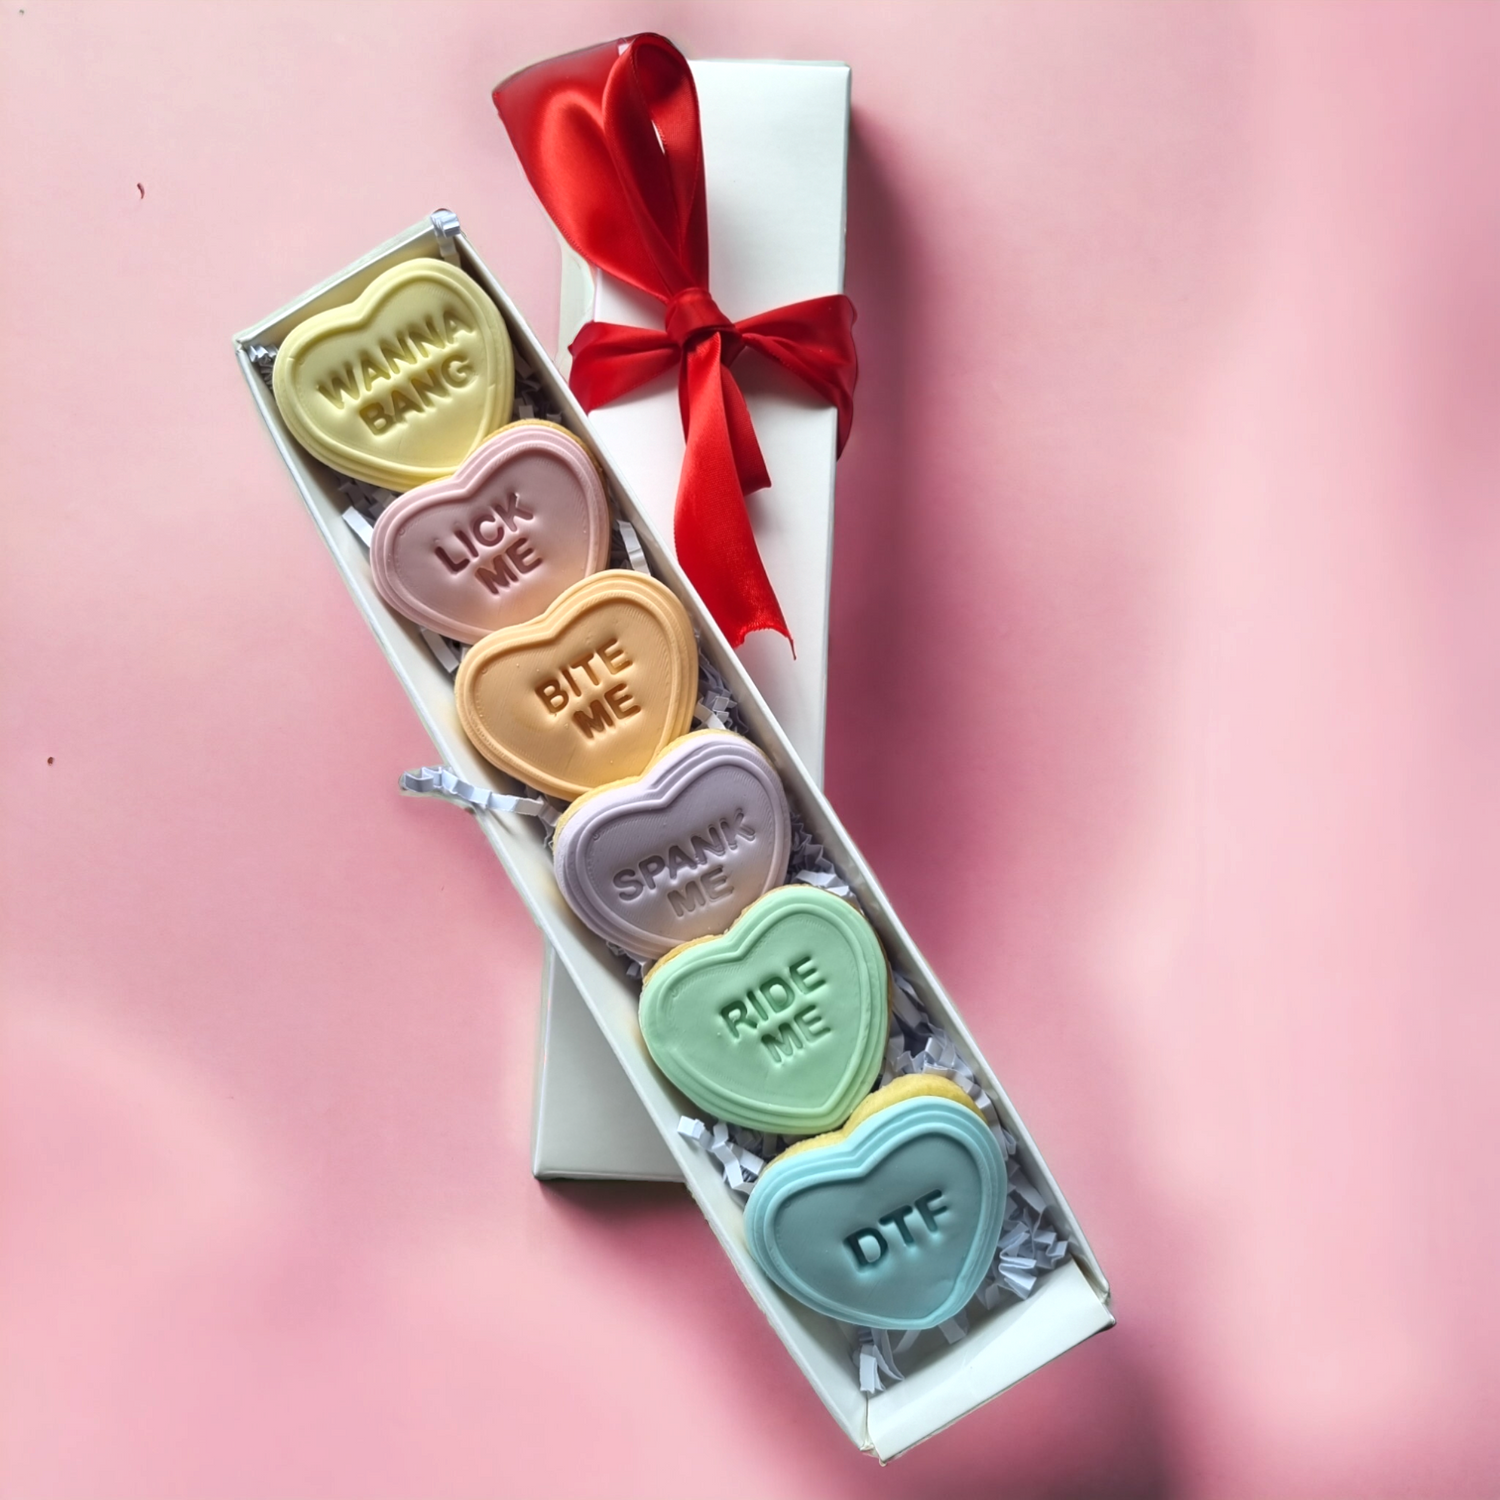 6 mini heart cookies with various sayings, displayed in a white box with a. red ribbon.